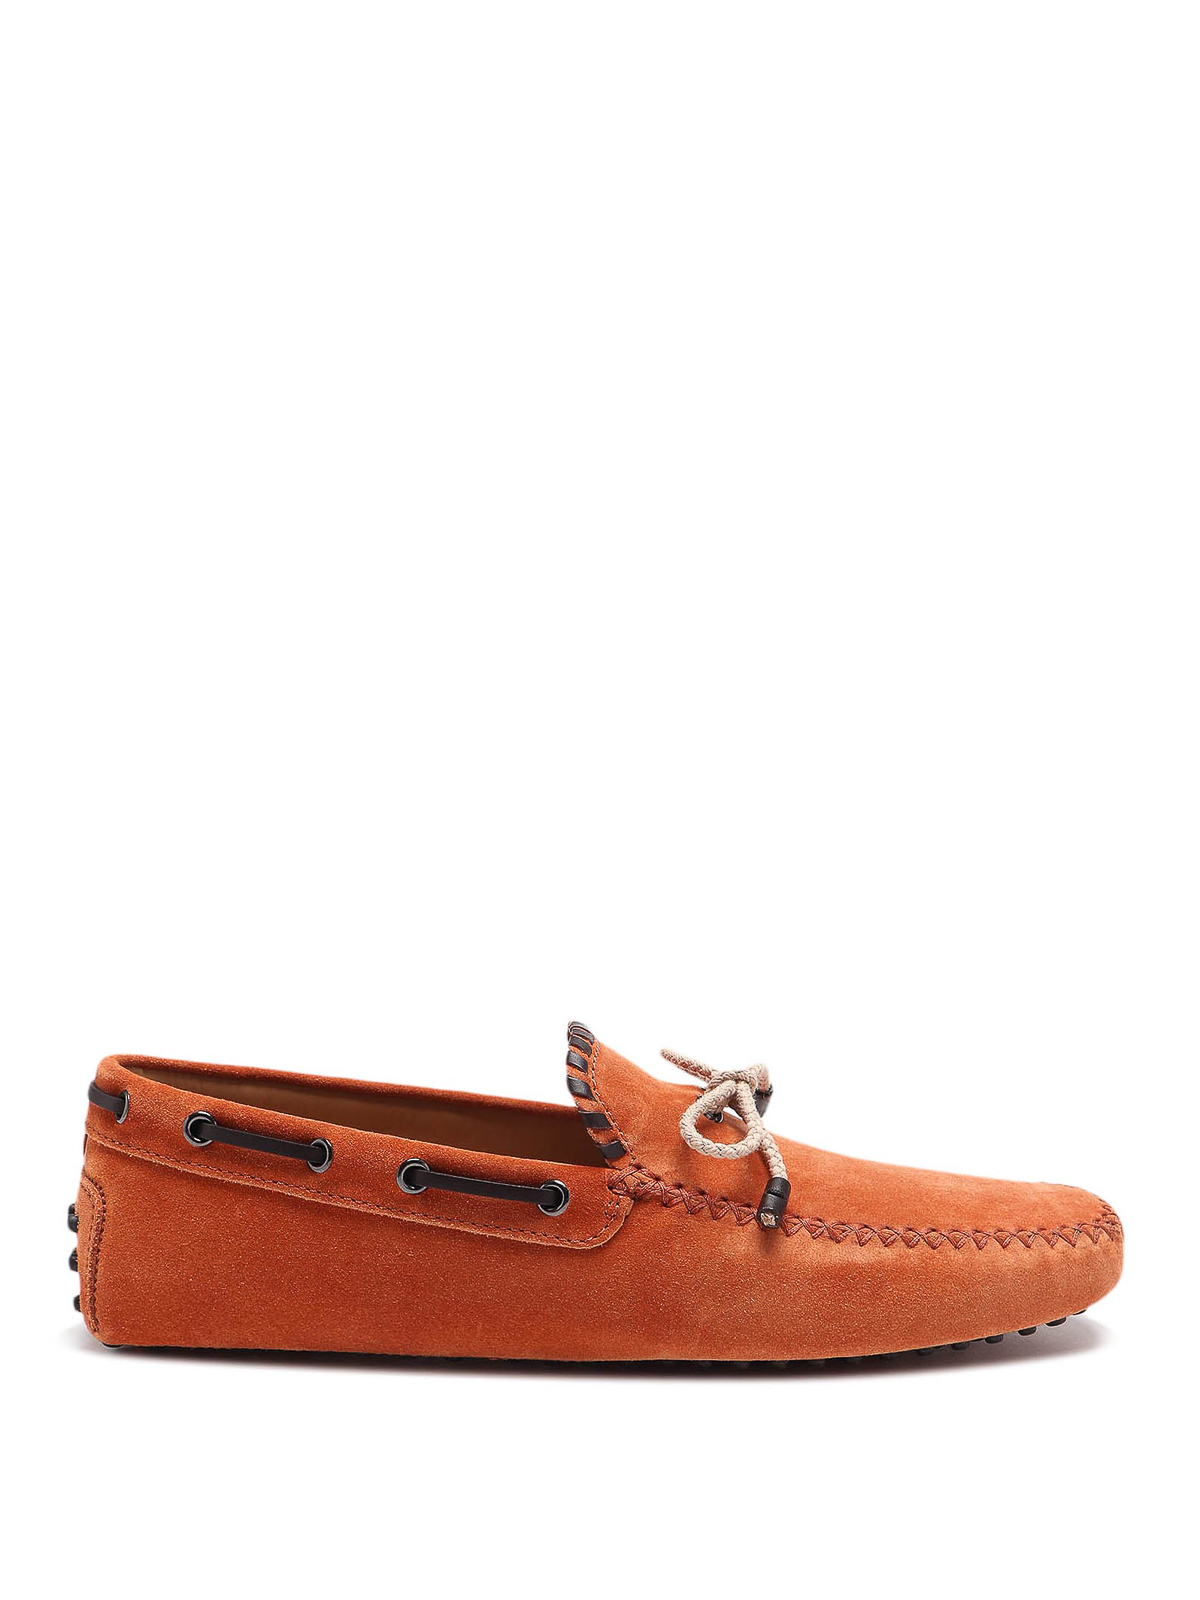 TOD'S GOMMINO DRIVING SUEDE LOAFERS